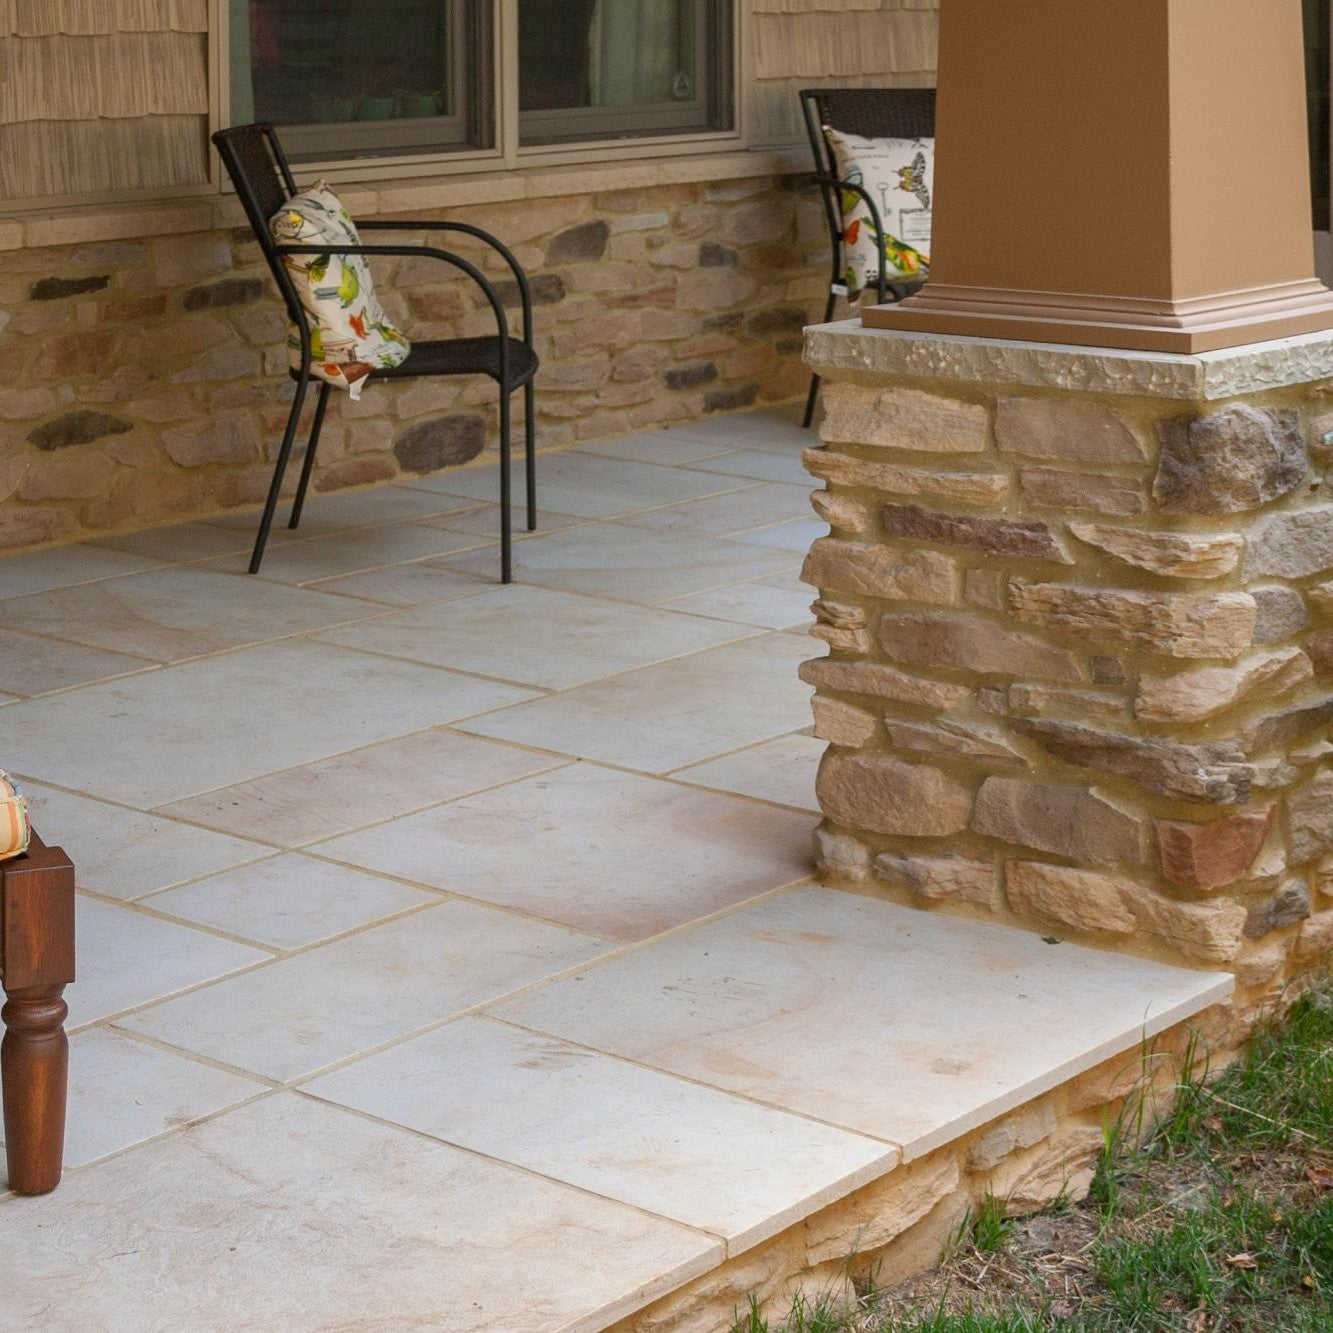 Exquisite pieces from the Signature Flagstone Collection, displaying luxurious textures and rich colors, perfect for sophisticated paving and architectural designs.